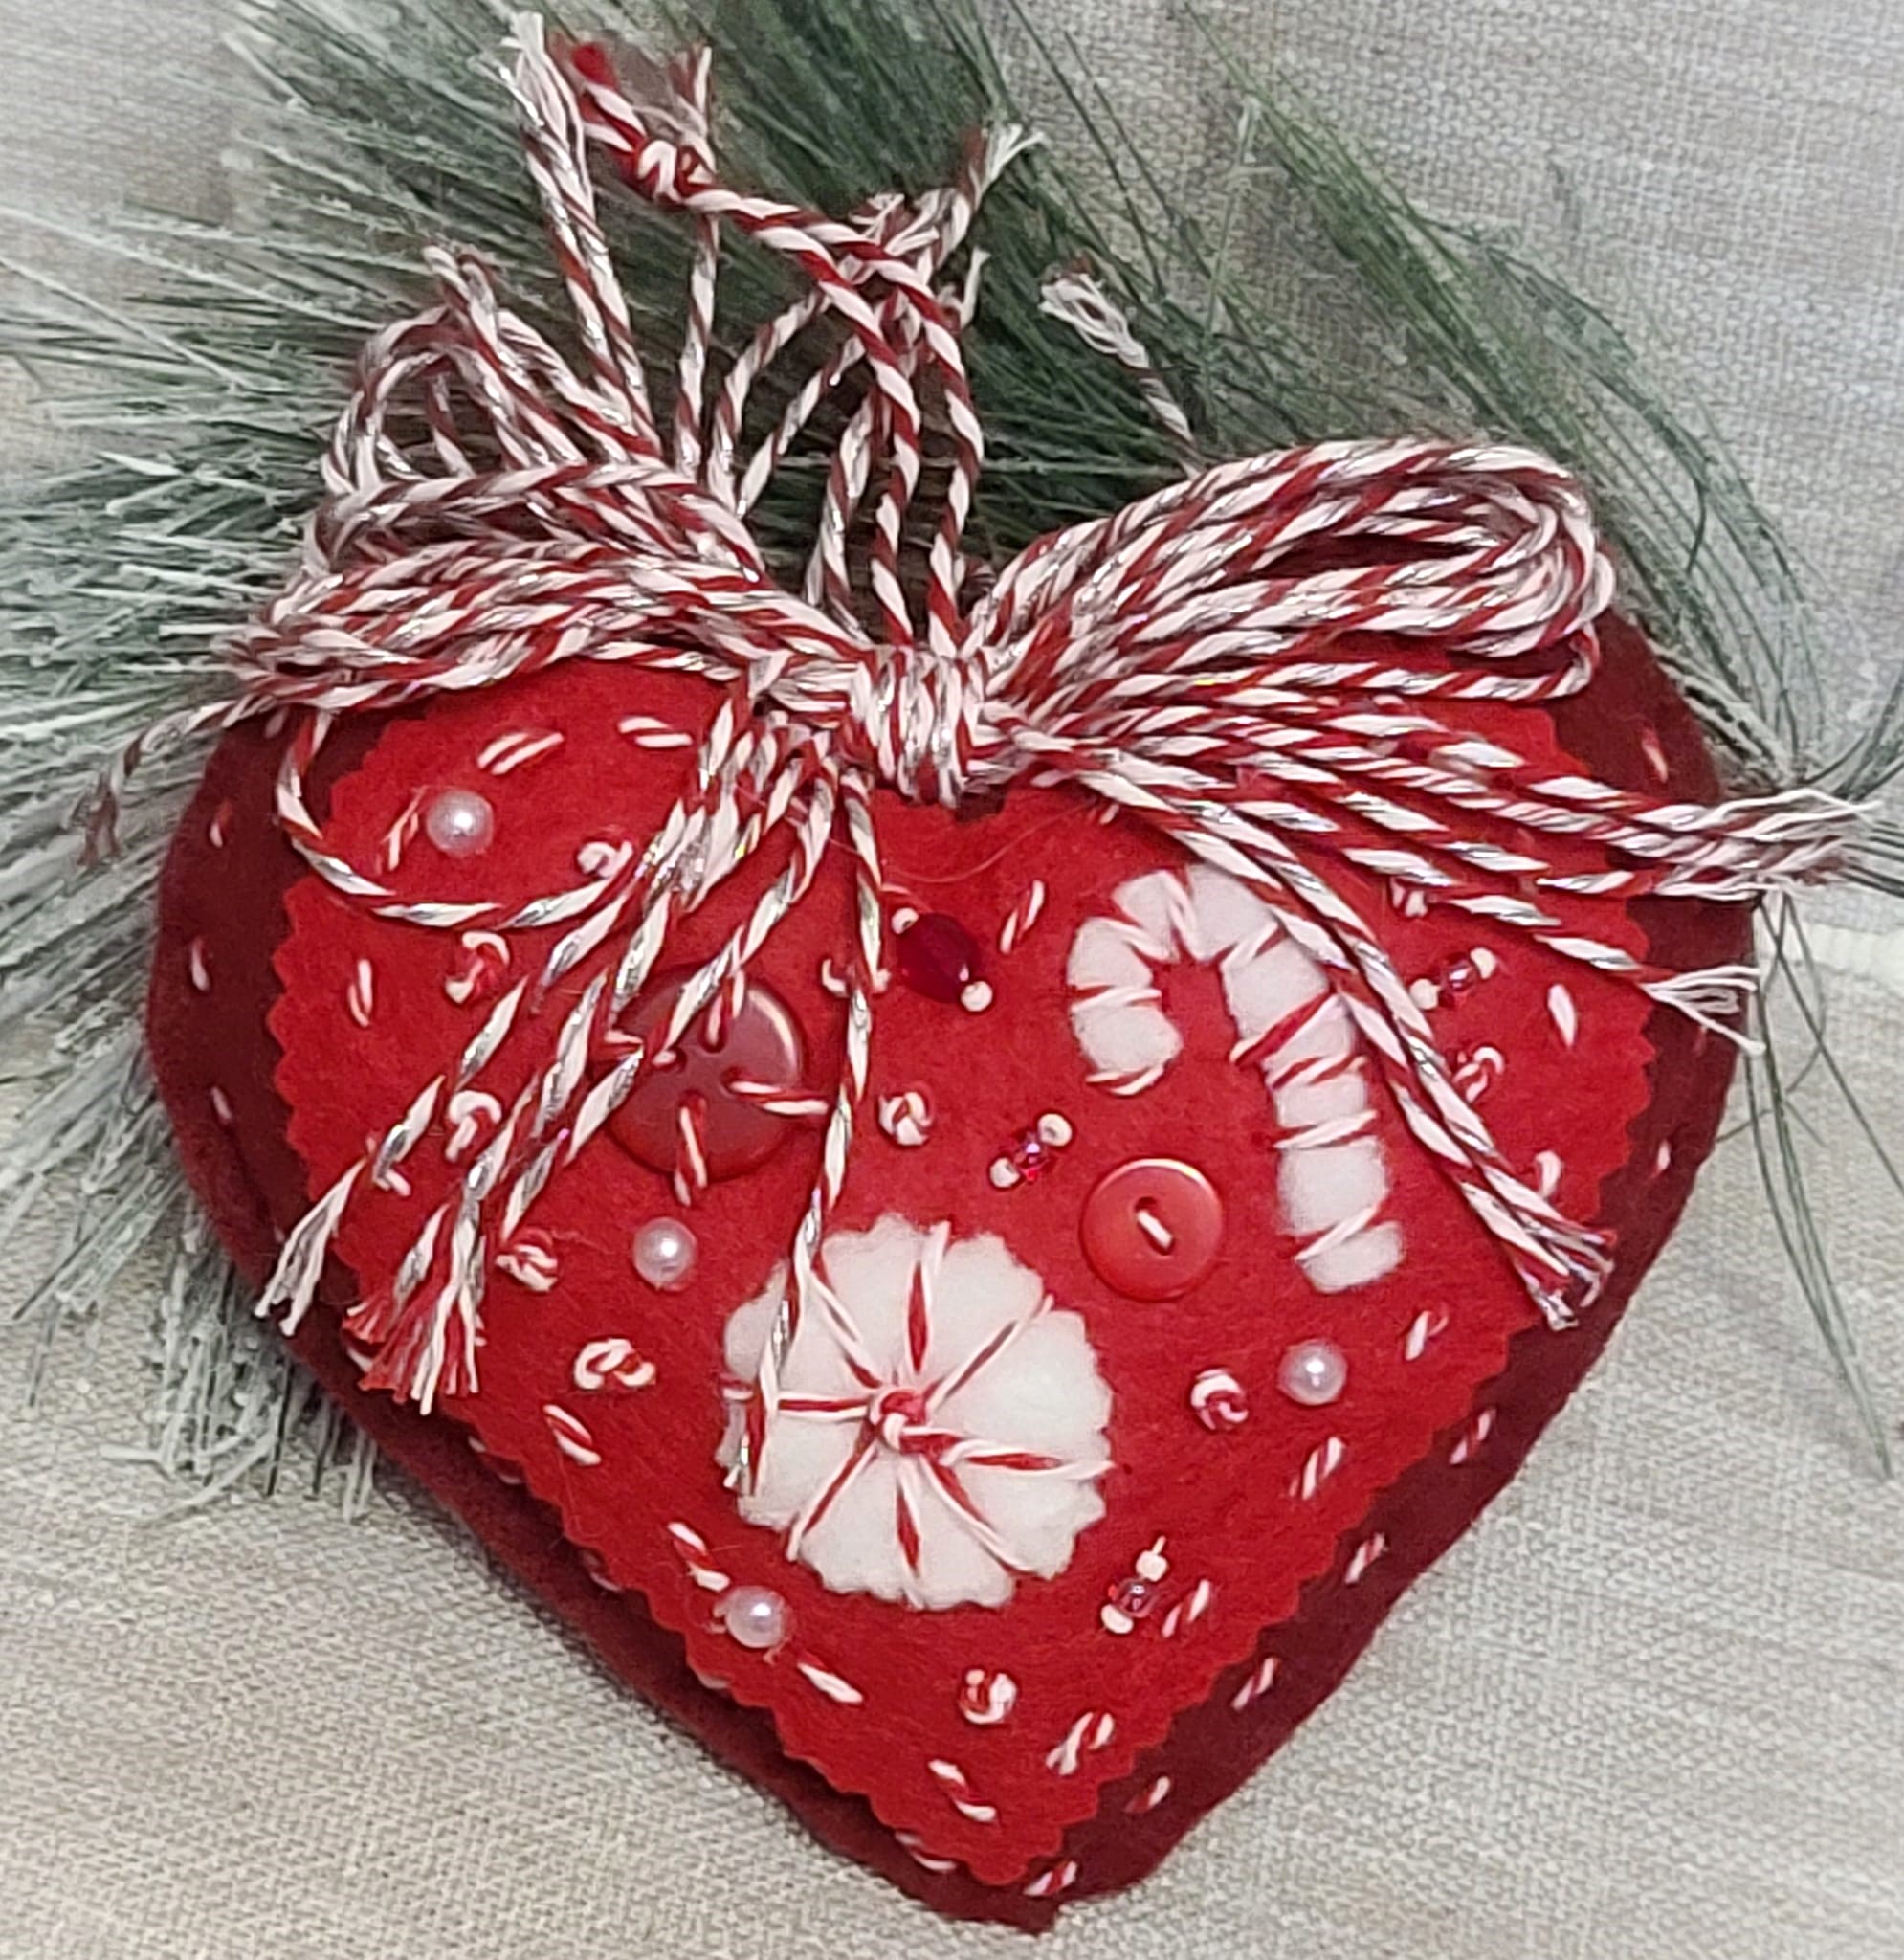 Extra Large red heart ornaments with embroidery candy cane